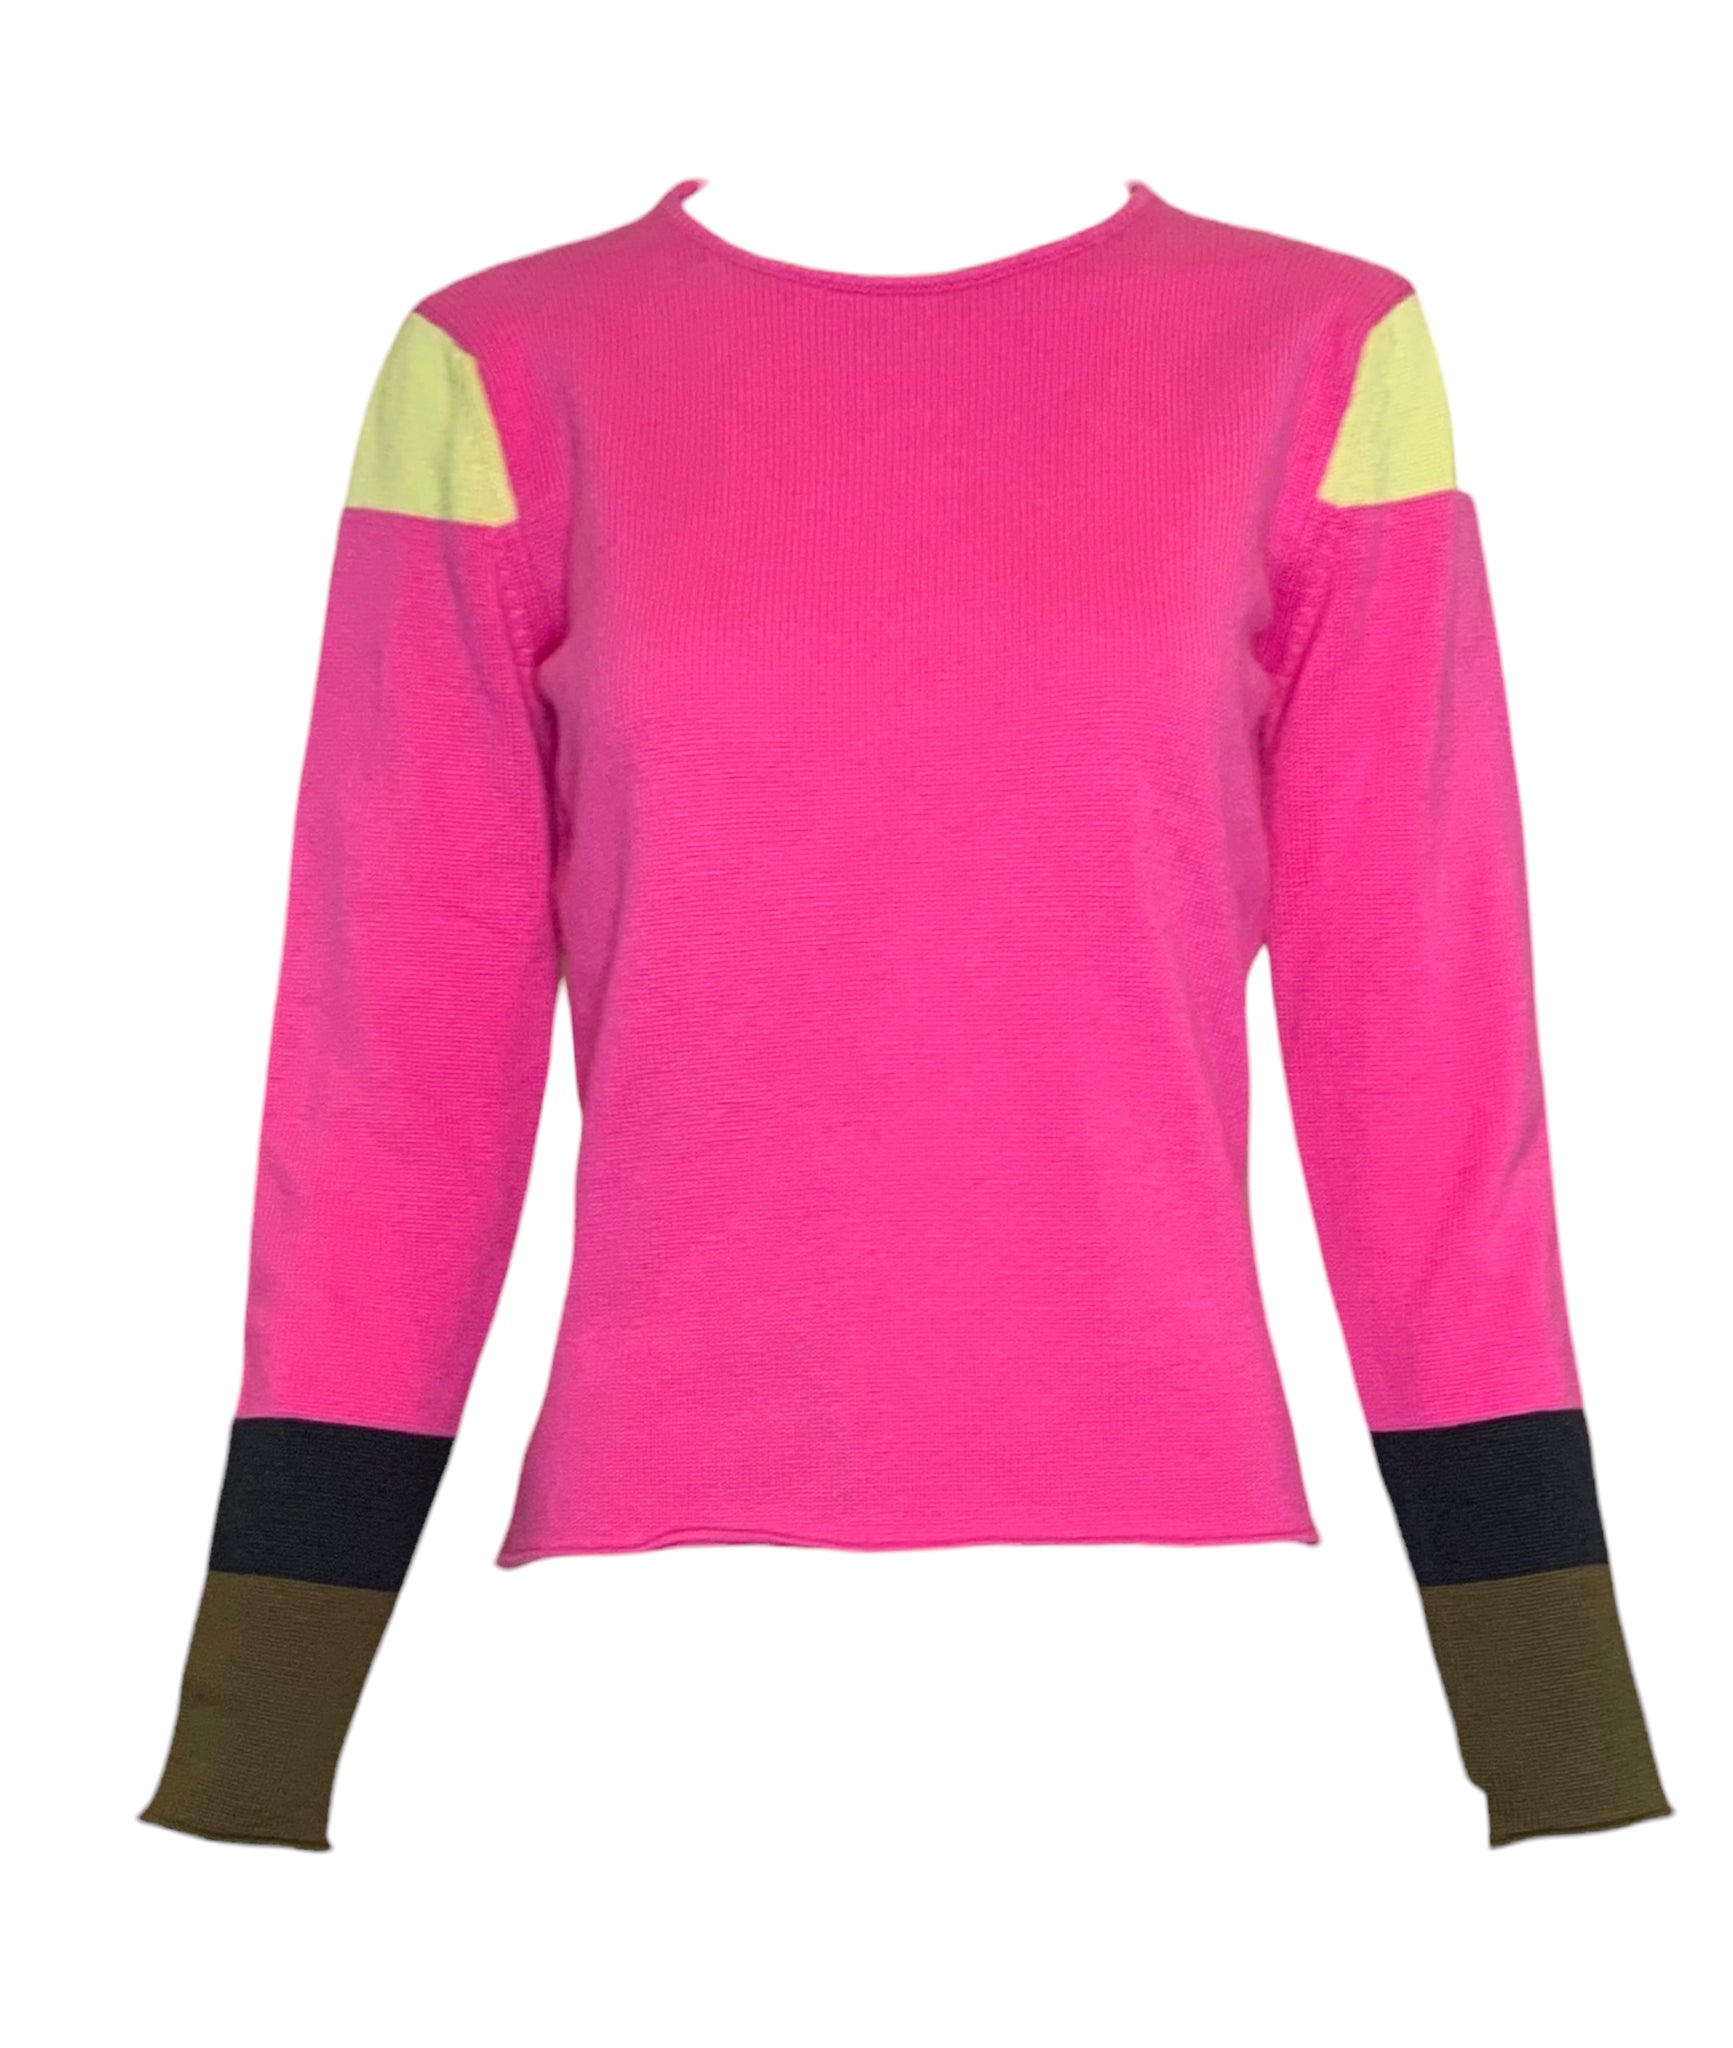 Lucien Pellat-Finet Y2K Pink Color-Block Cashmere Sweater New/Old